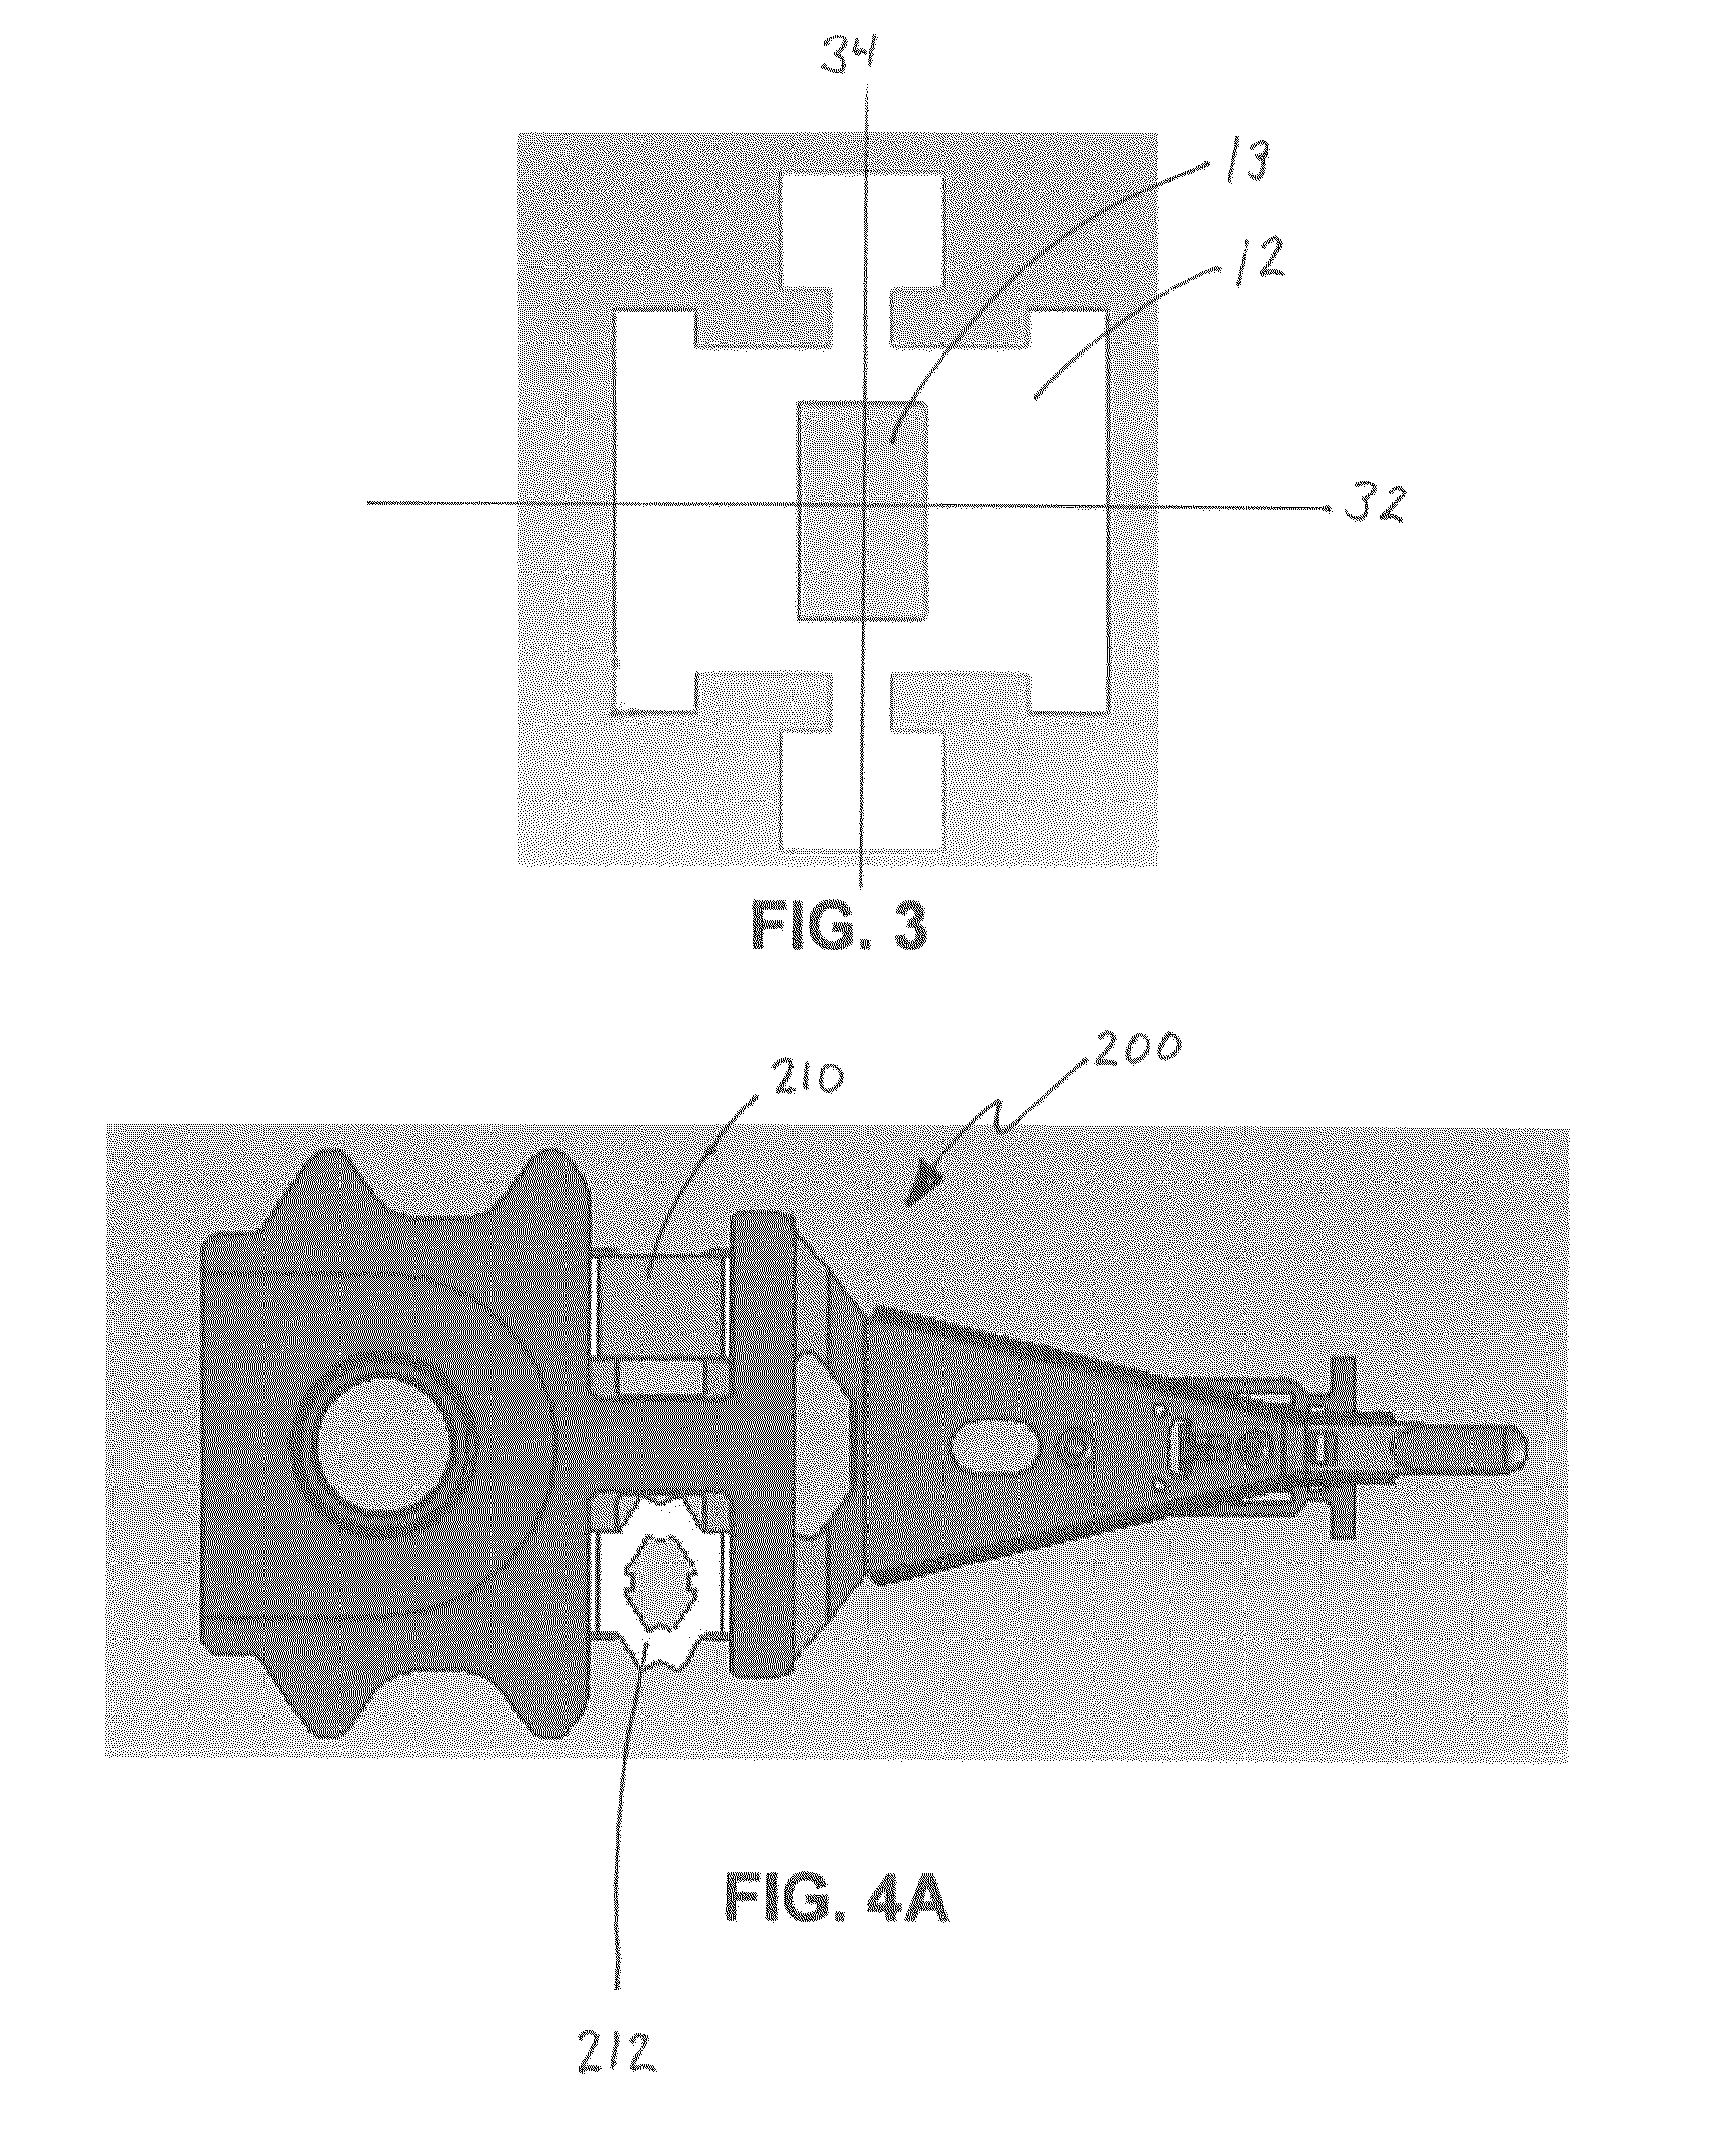 Dual stage actuator suspension having a single microactuator and employing pseudo symmetry to achieve suspension balance